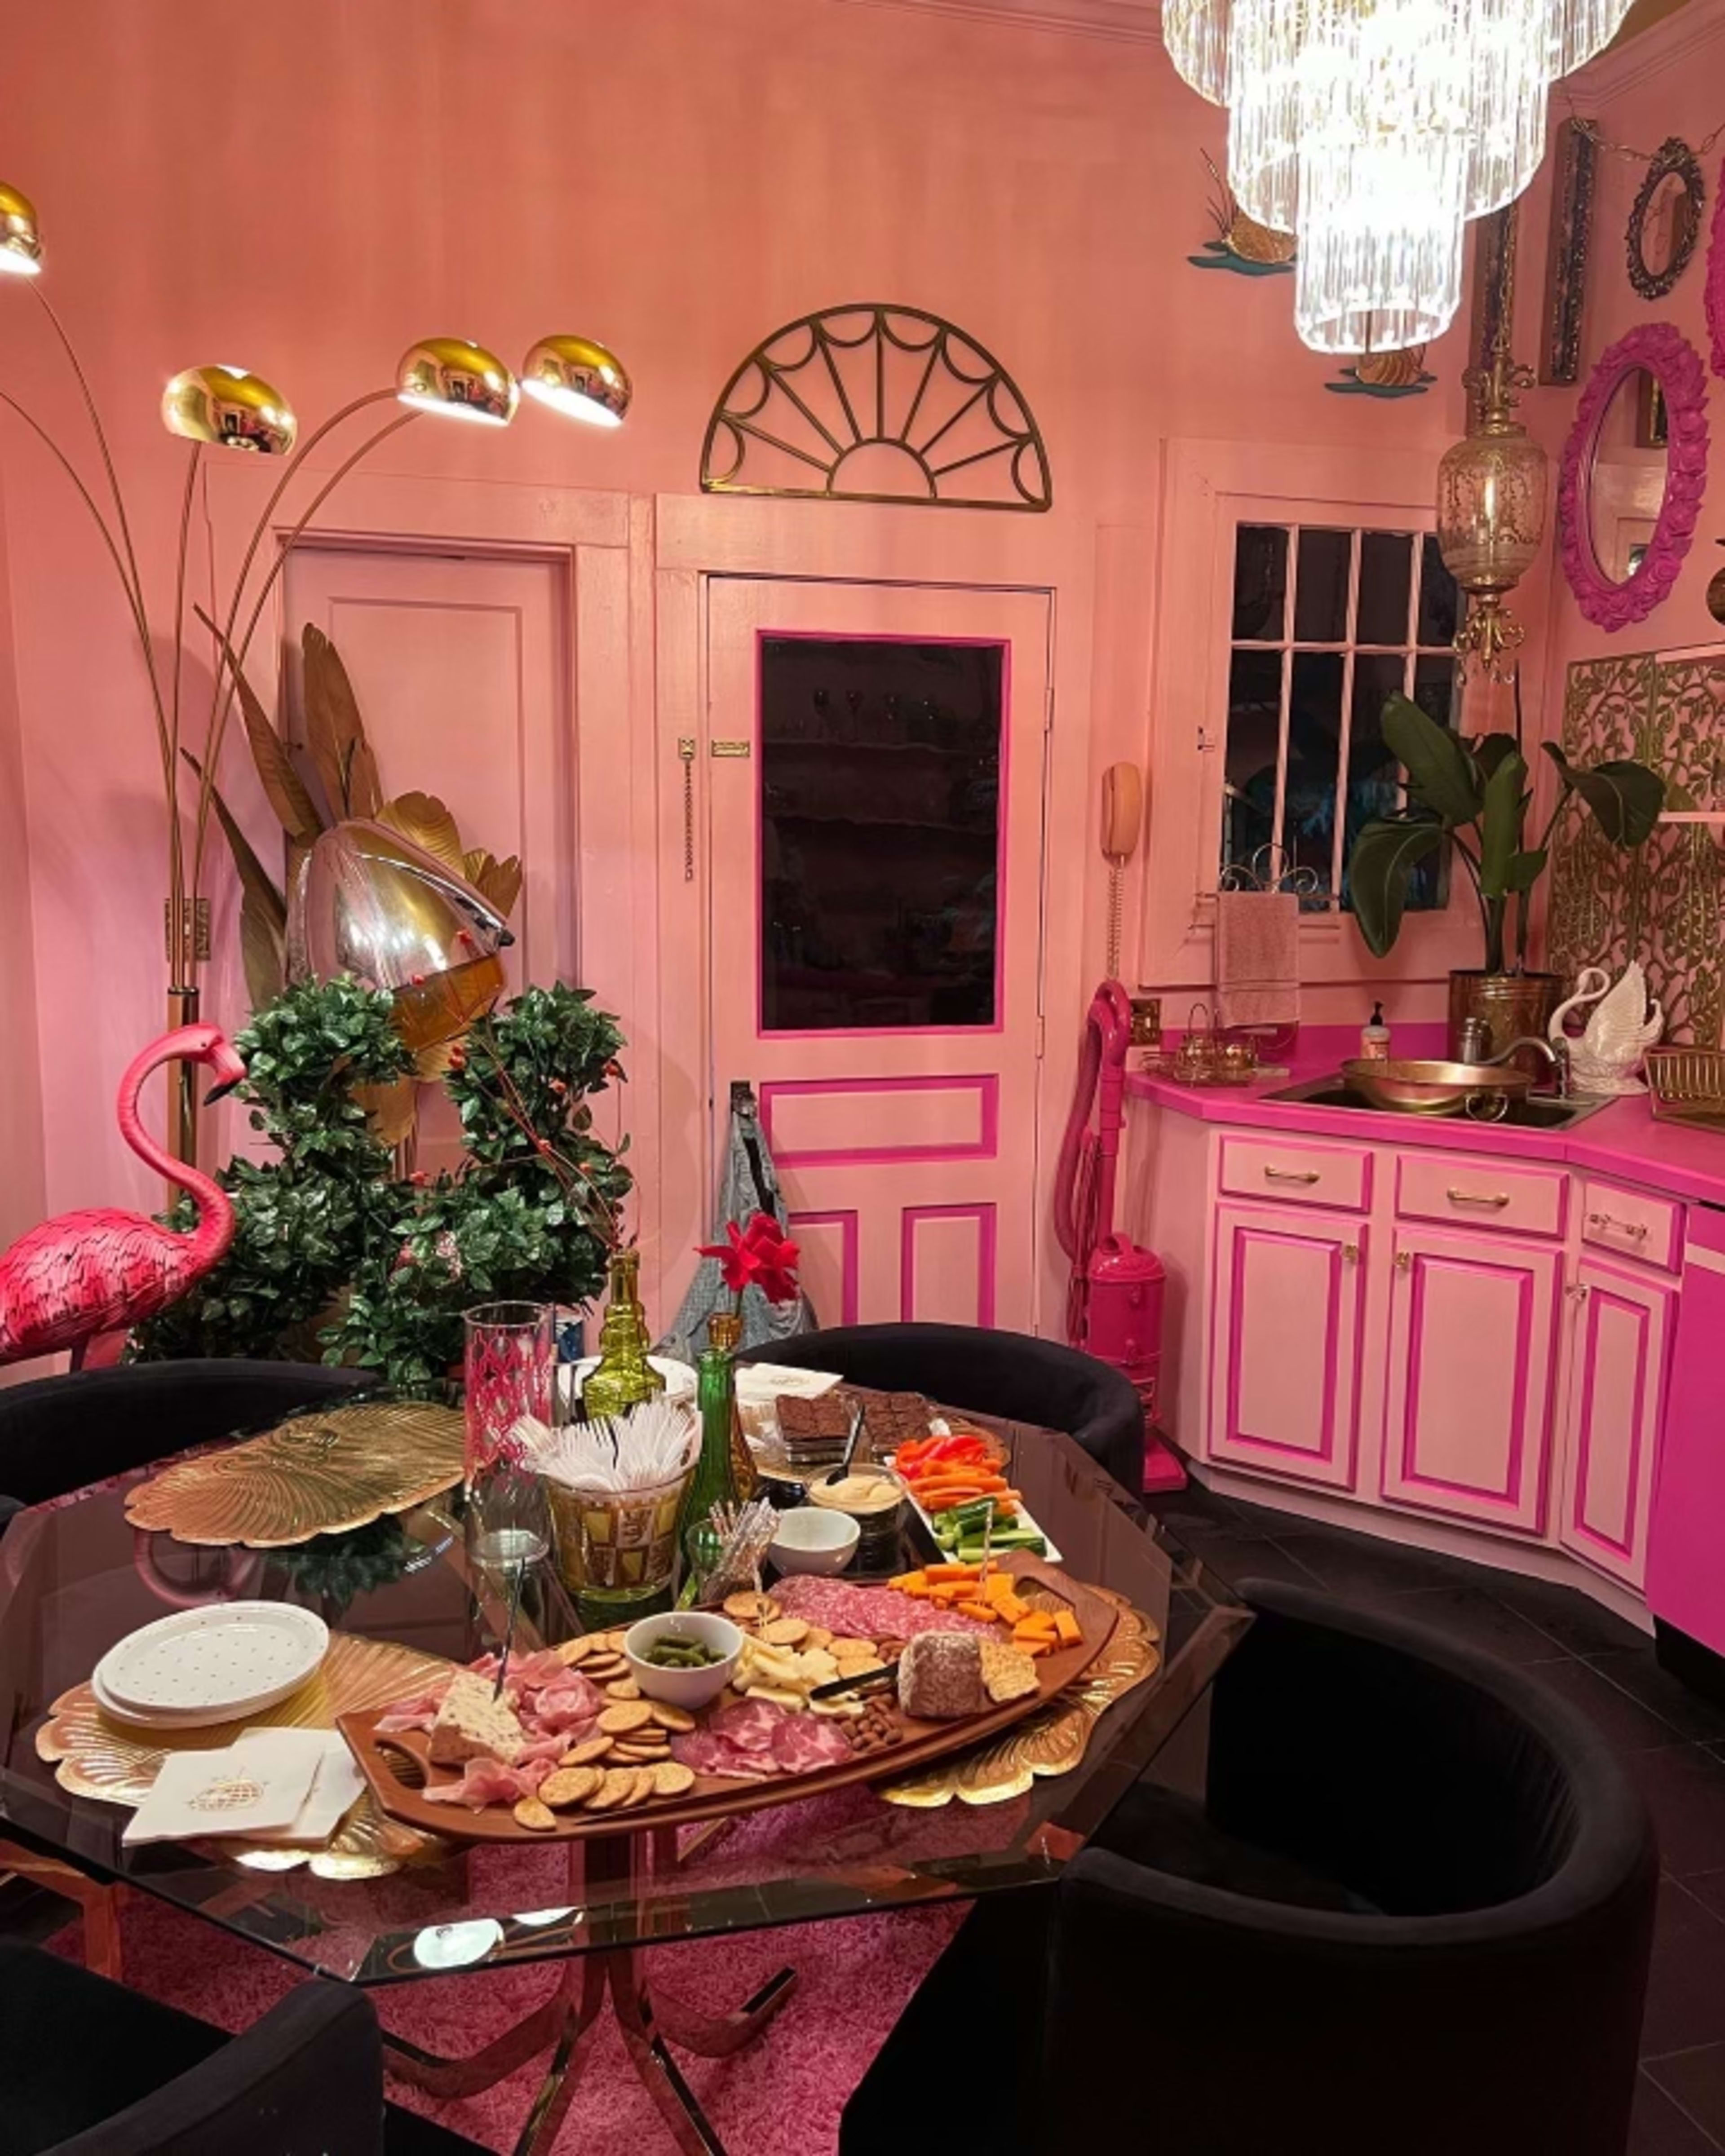 A retro dining room with pink walls and black chairs.